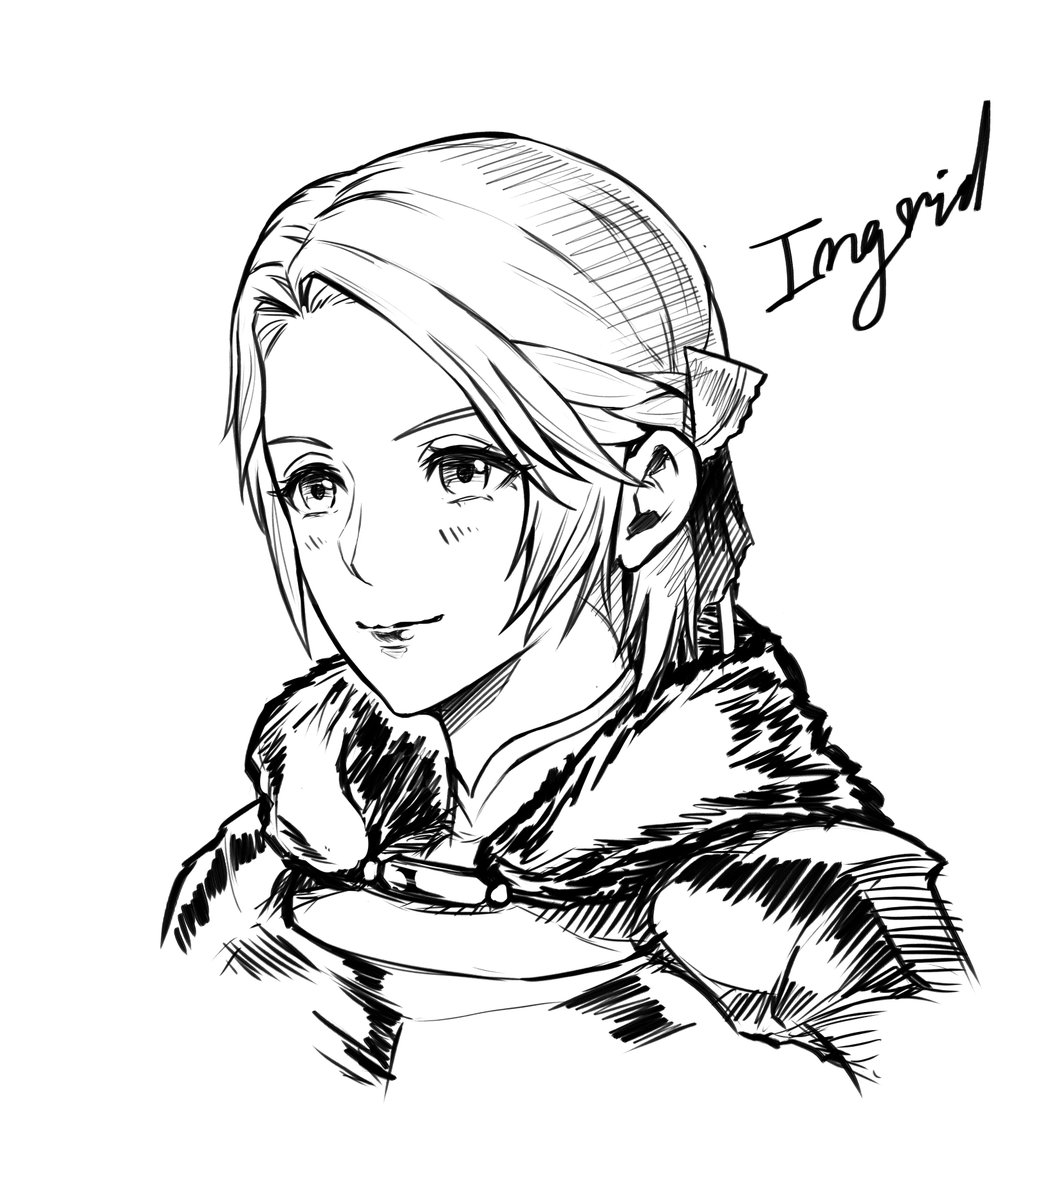 Ingrid doodle, she's unstoppable as Falcon Knight, nothing can double my girl ?

#FireEmblemThreeHouses #FireEmblem3Houses 